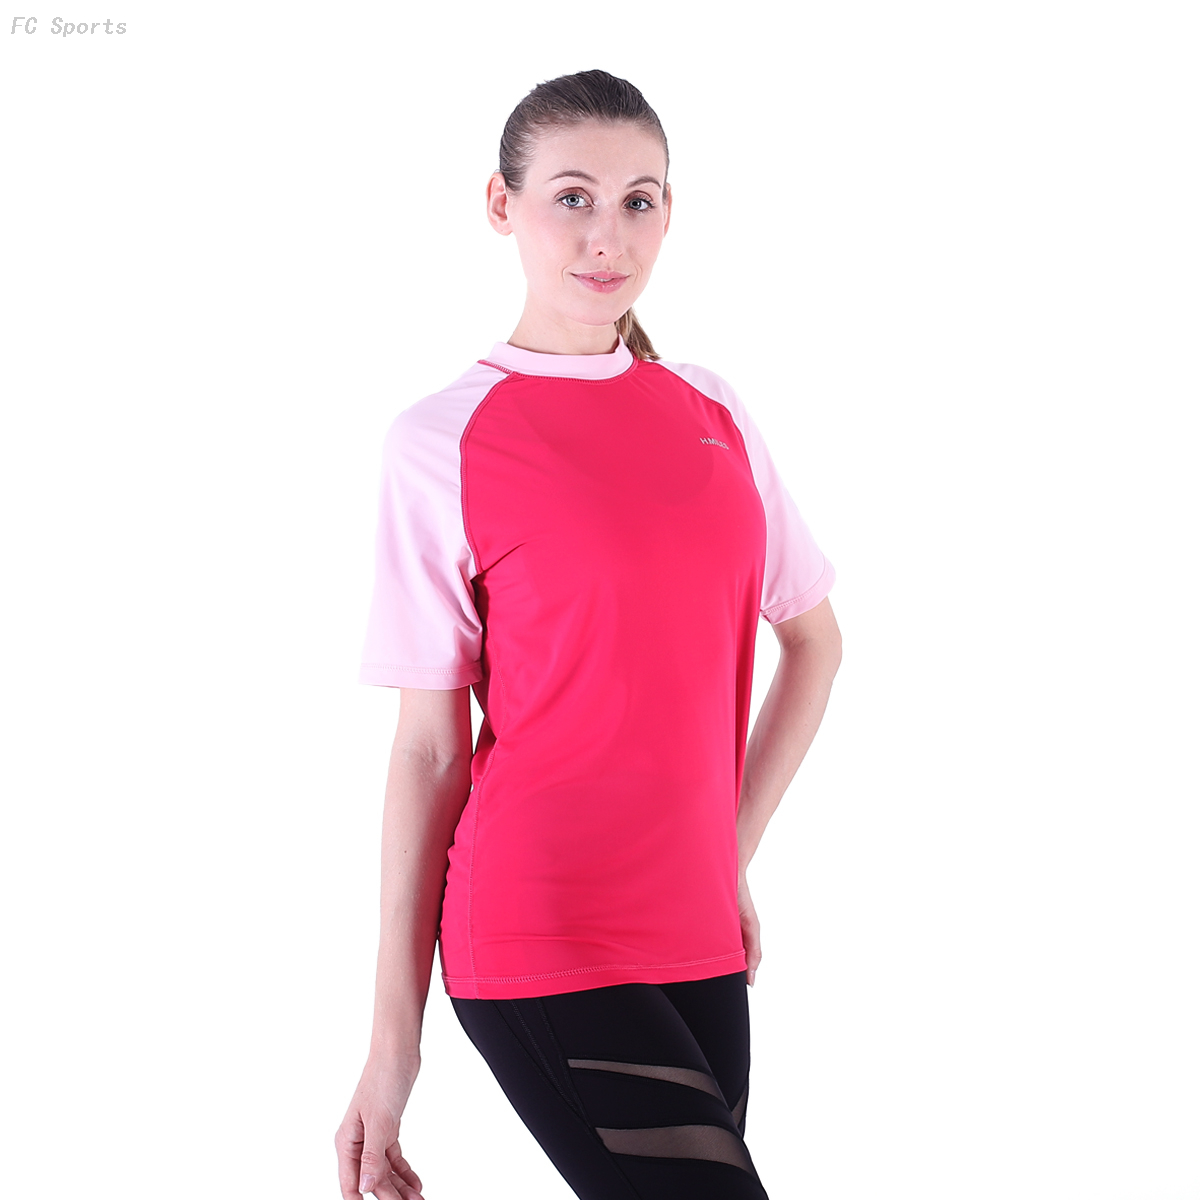 FC Sports Tee Shirt Women Slim Breathable Surf Suit Style Outdoor Clothes Wholesale